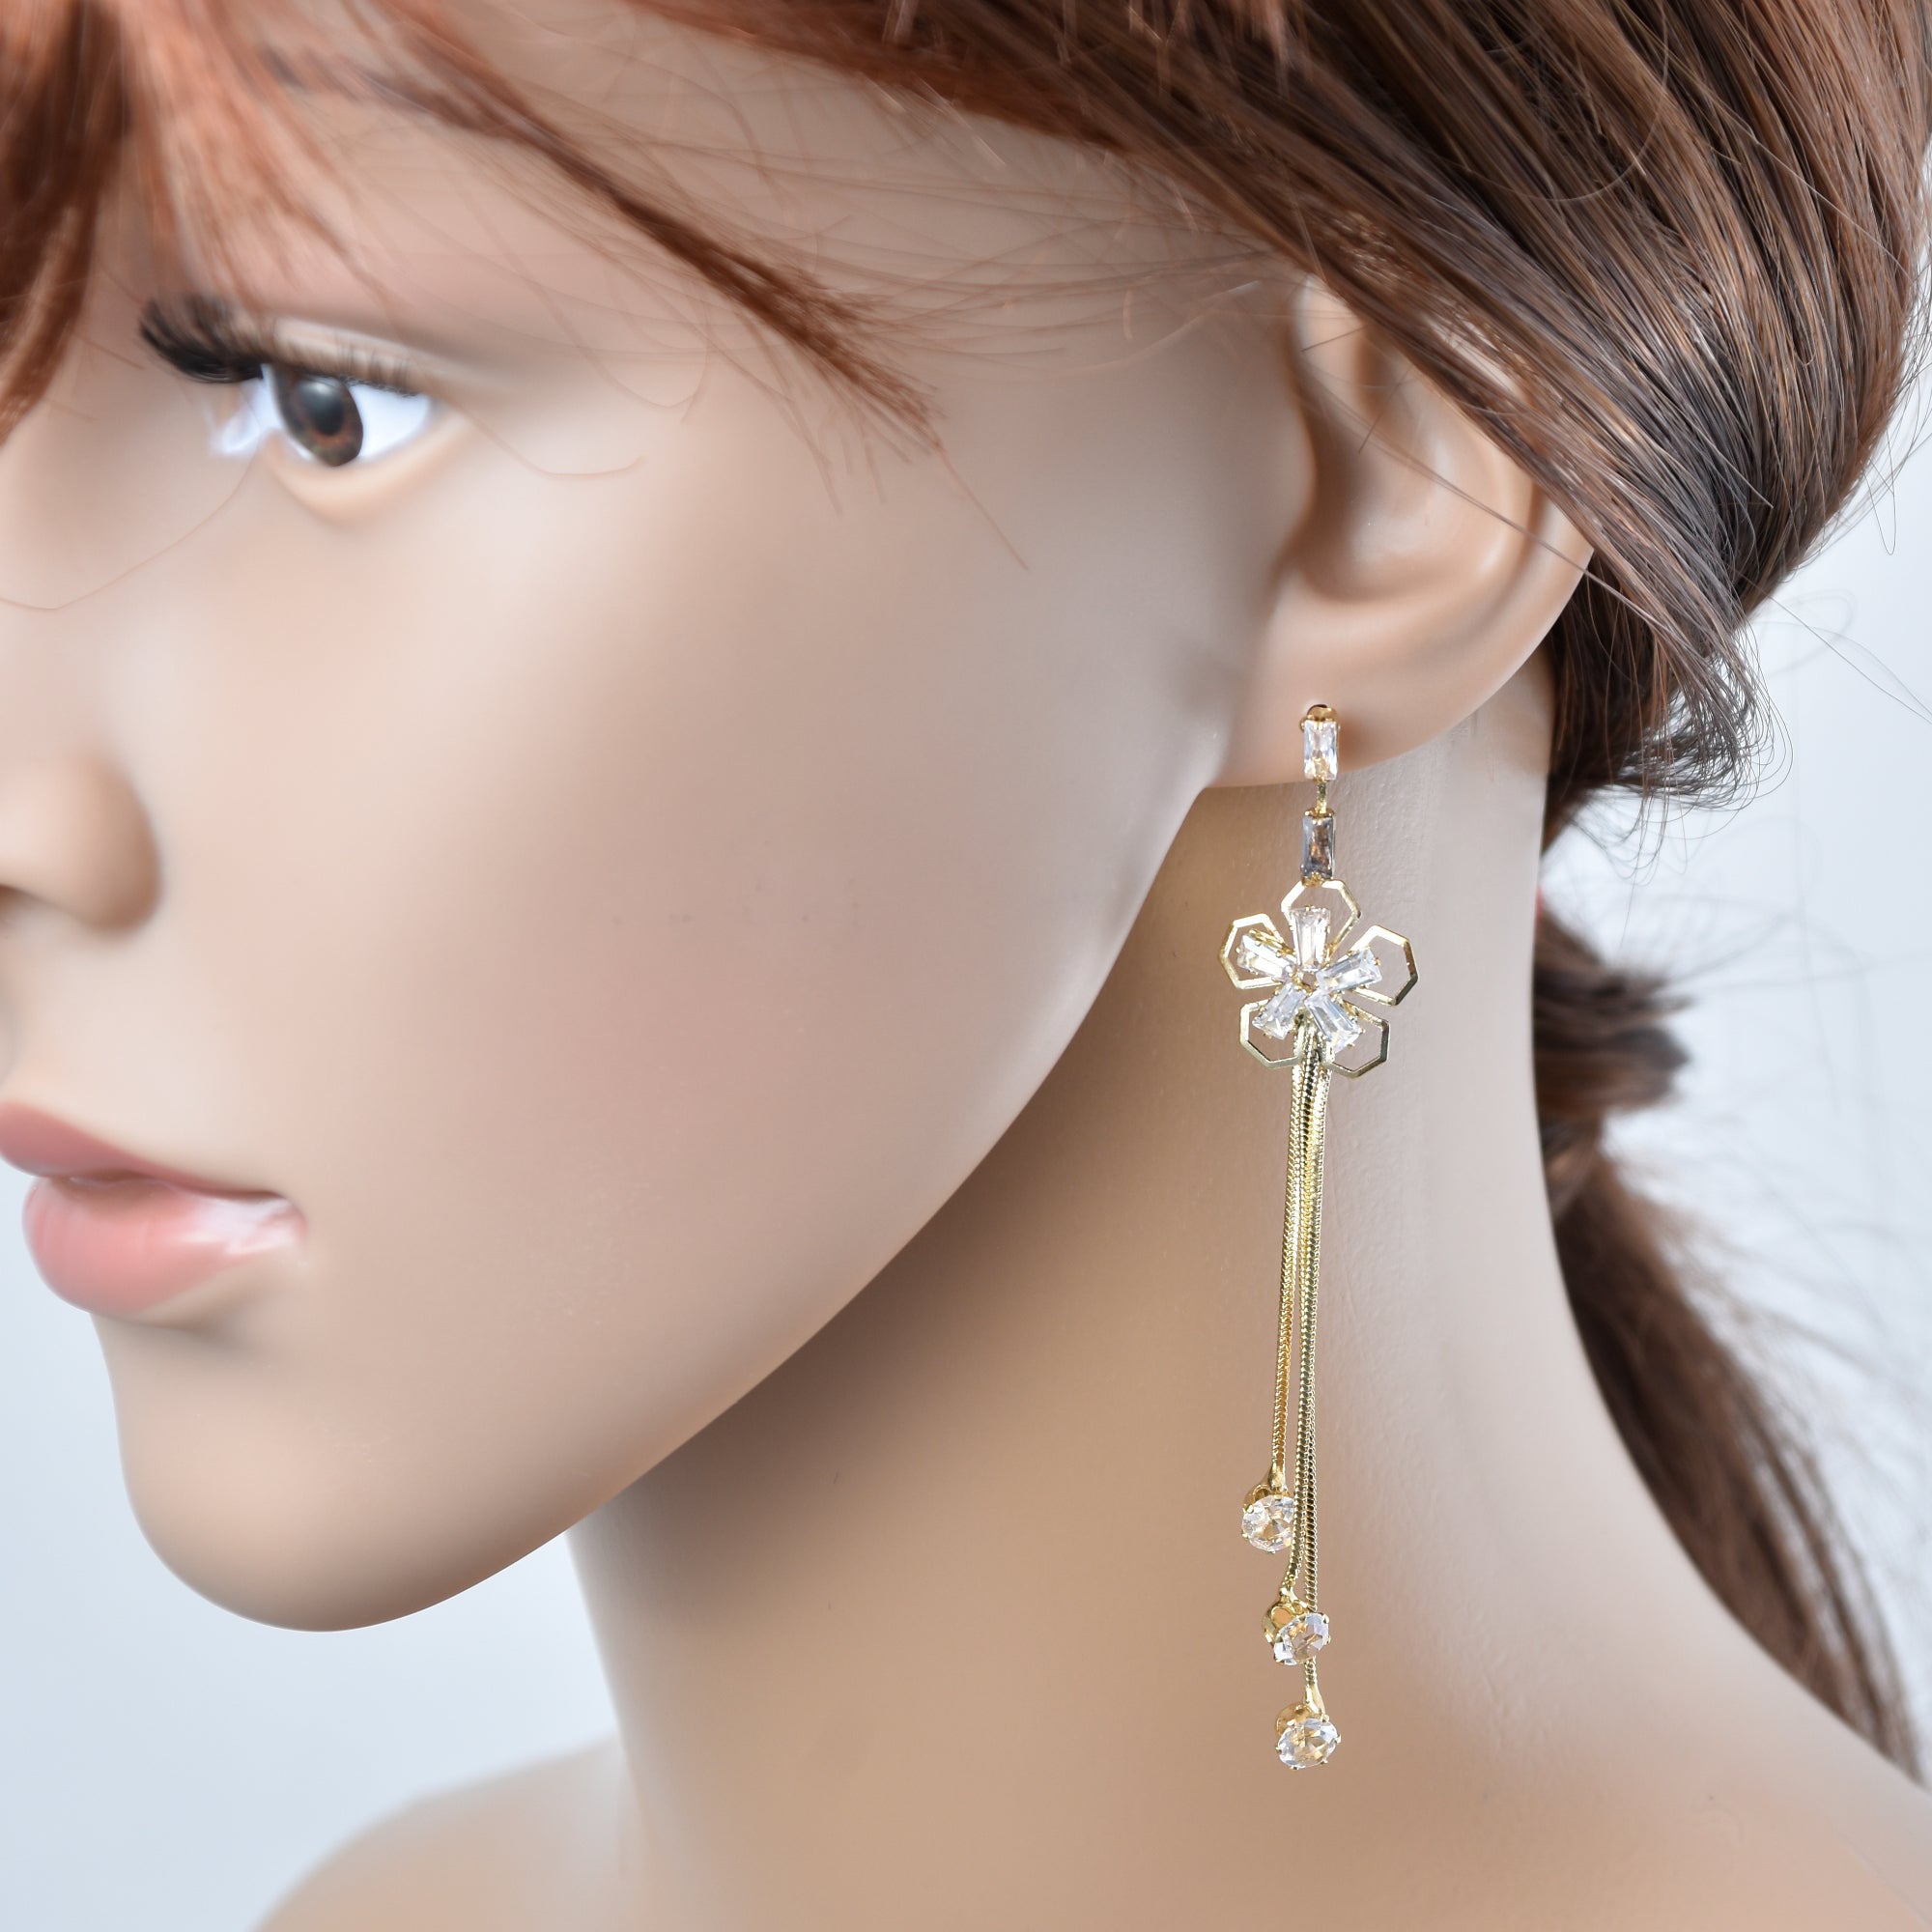 Floral Dangle Earrings With Chain Design